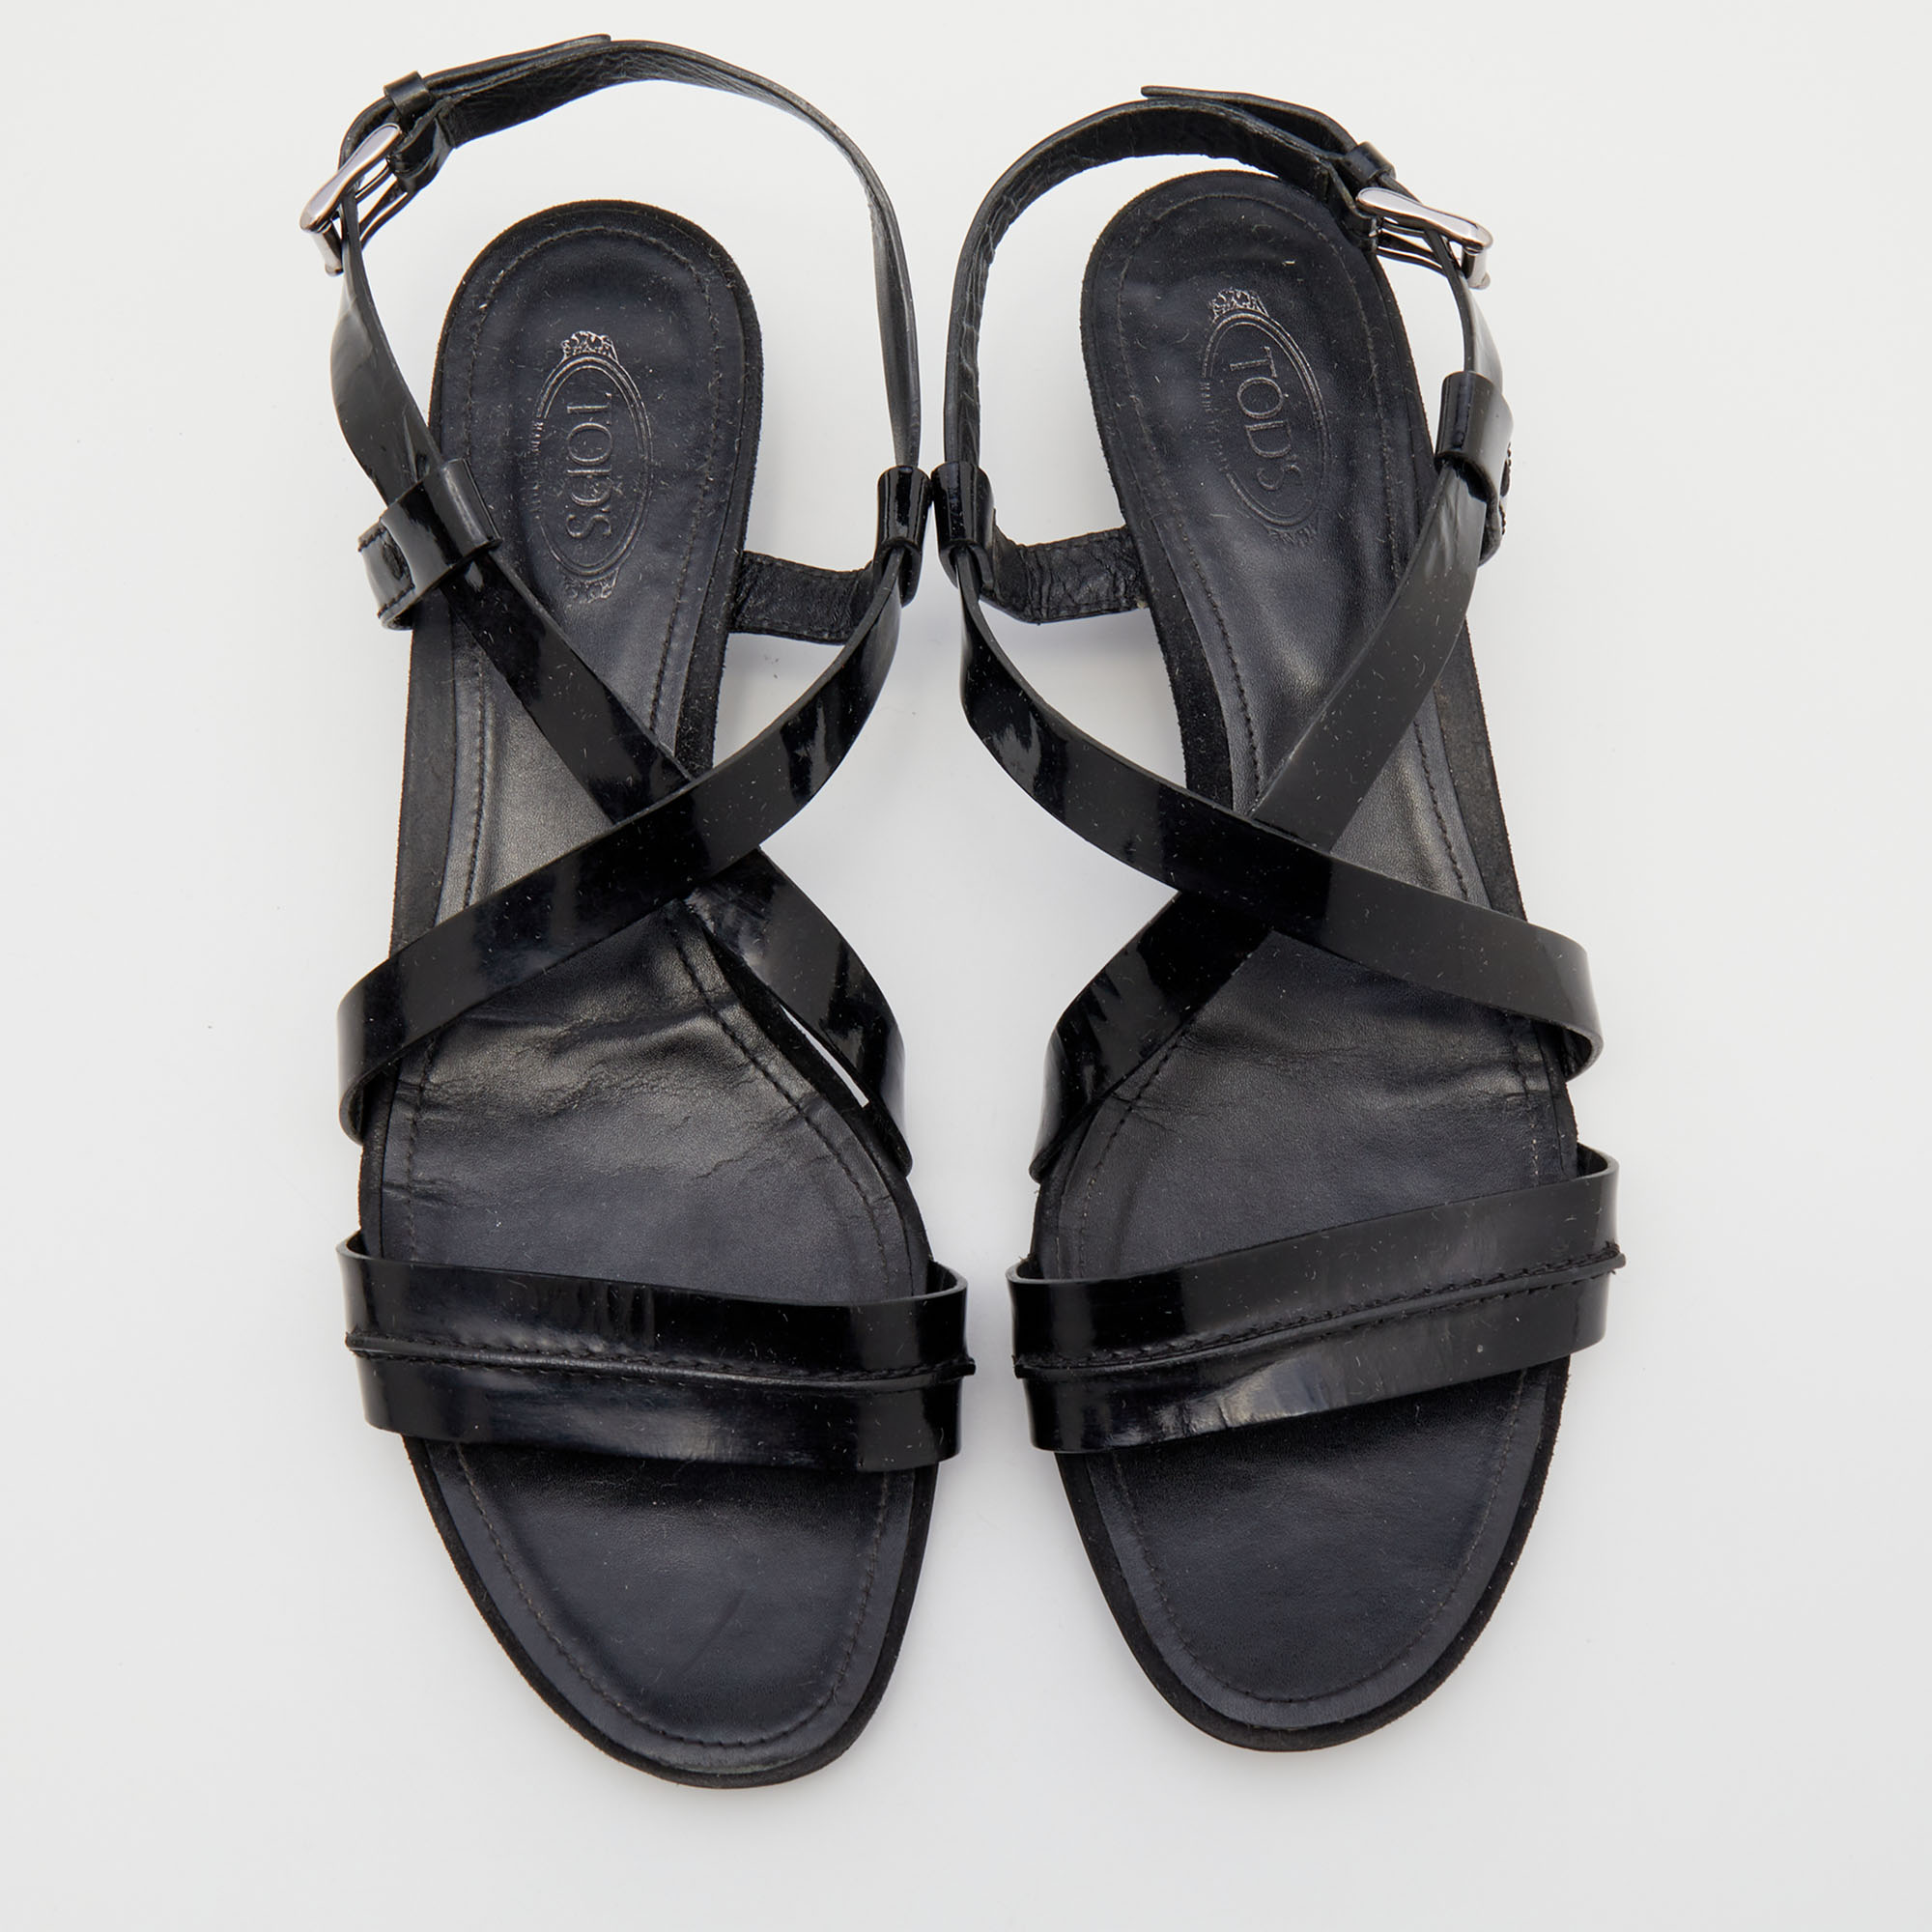 Tod's Black Leather Criss Cross Slingback Sandals Size 40